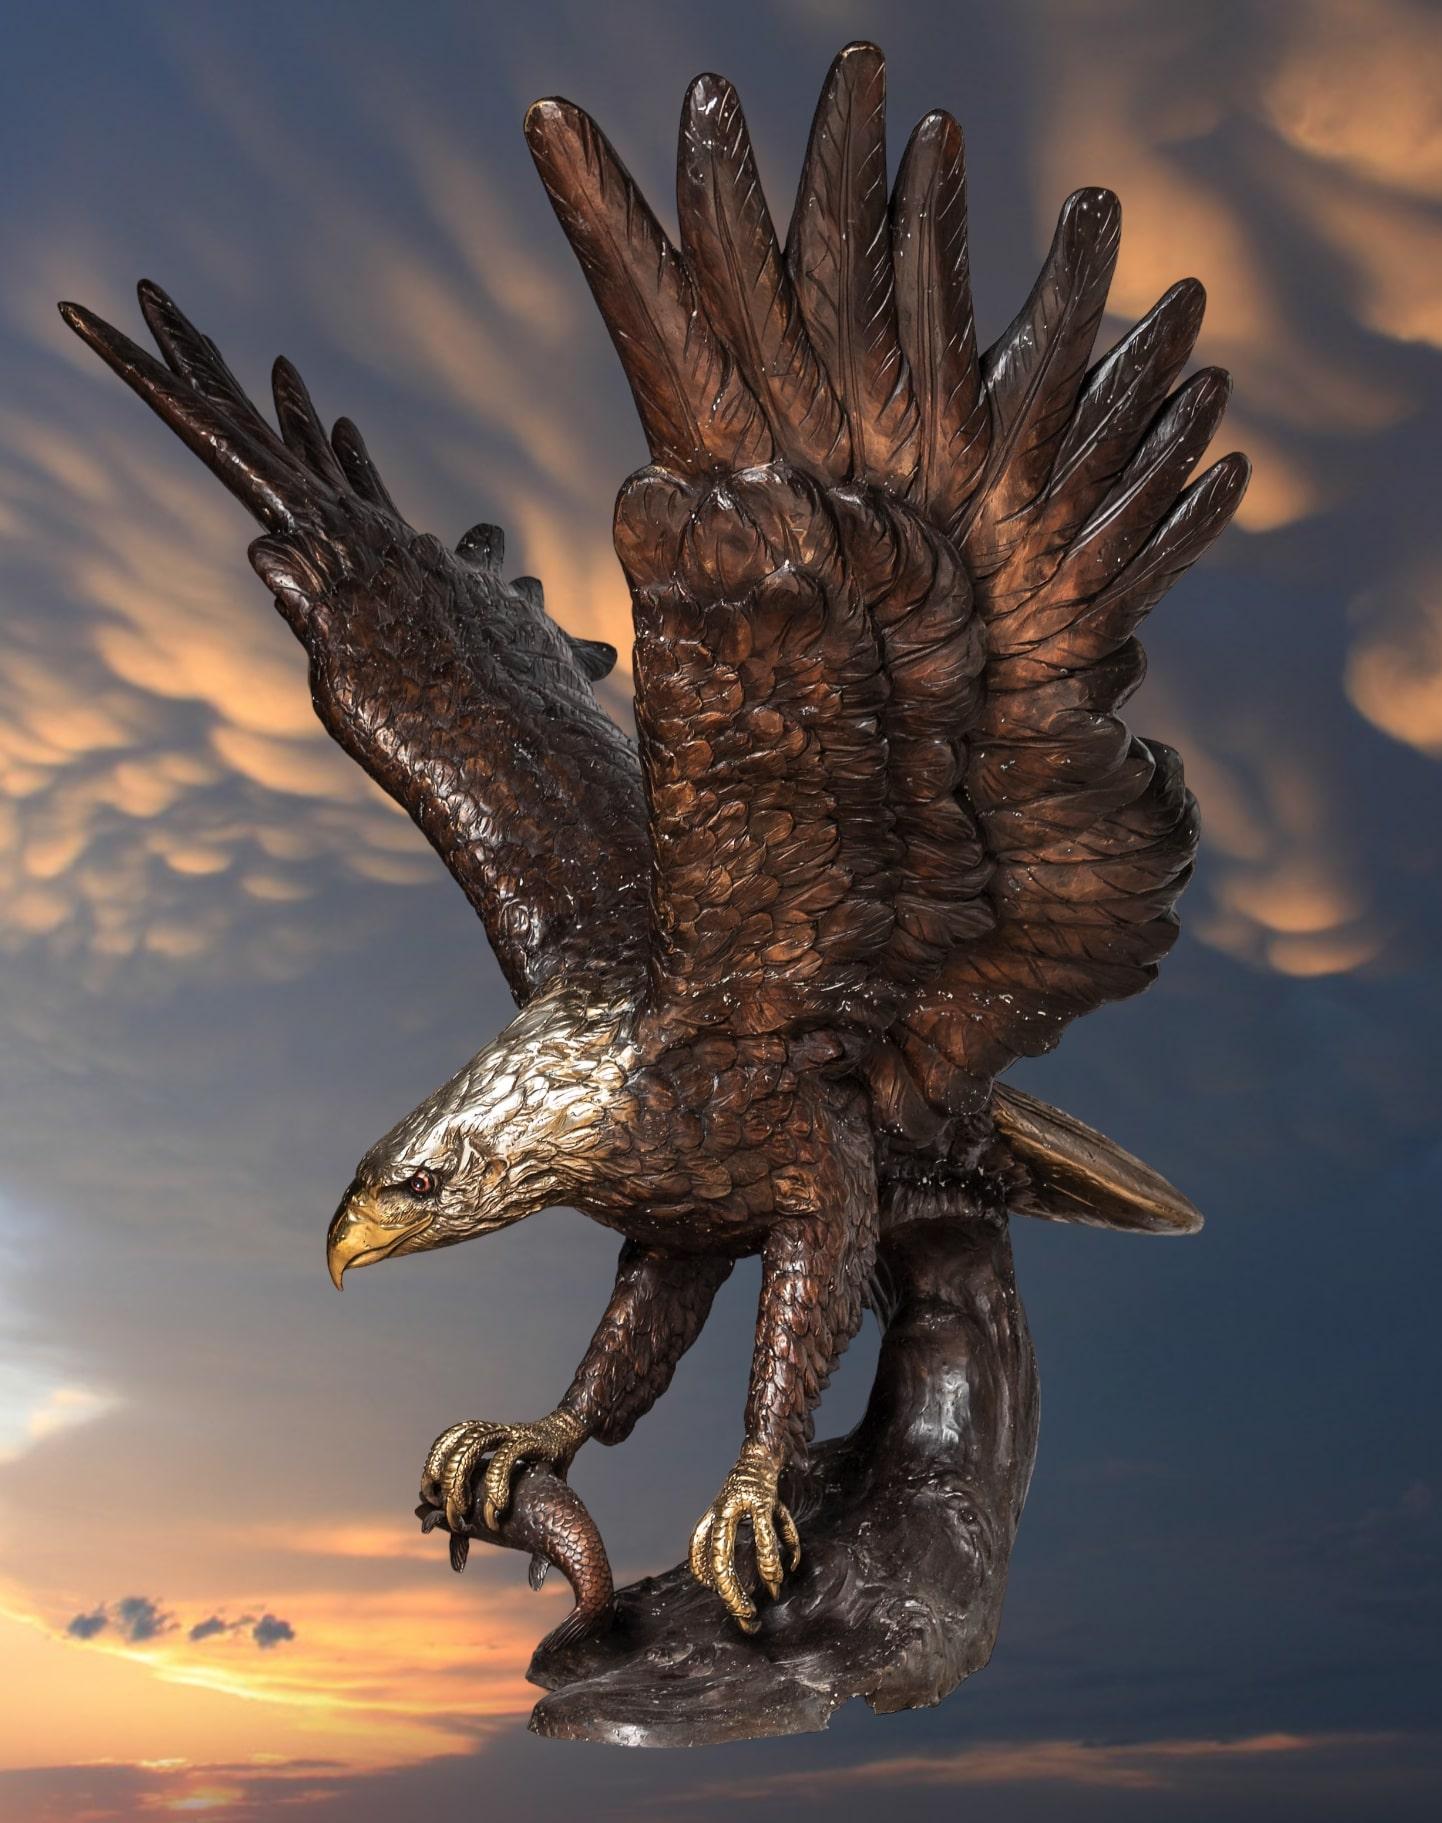 Monumental bronze eagle sculpture. The majestic bird lands on a tree branch after a successful hunt with prey in his right claw. The detail and finish of this piece are exceptional.